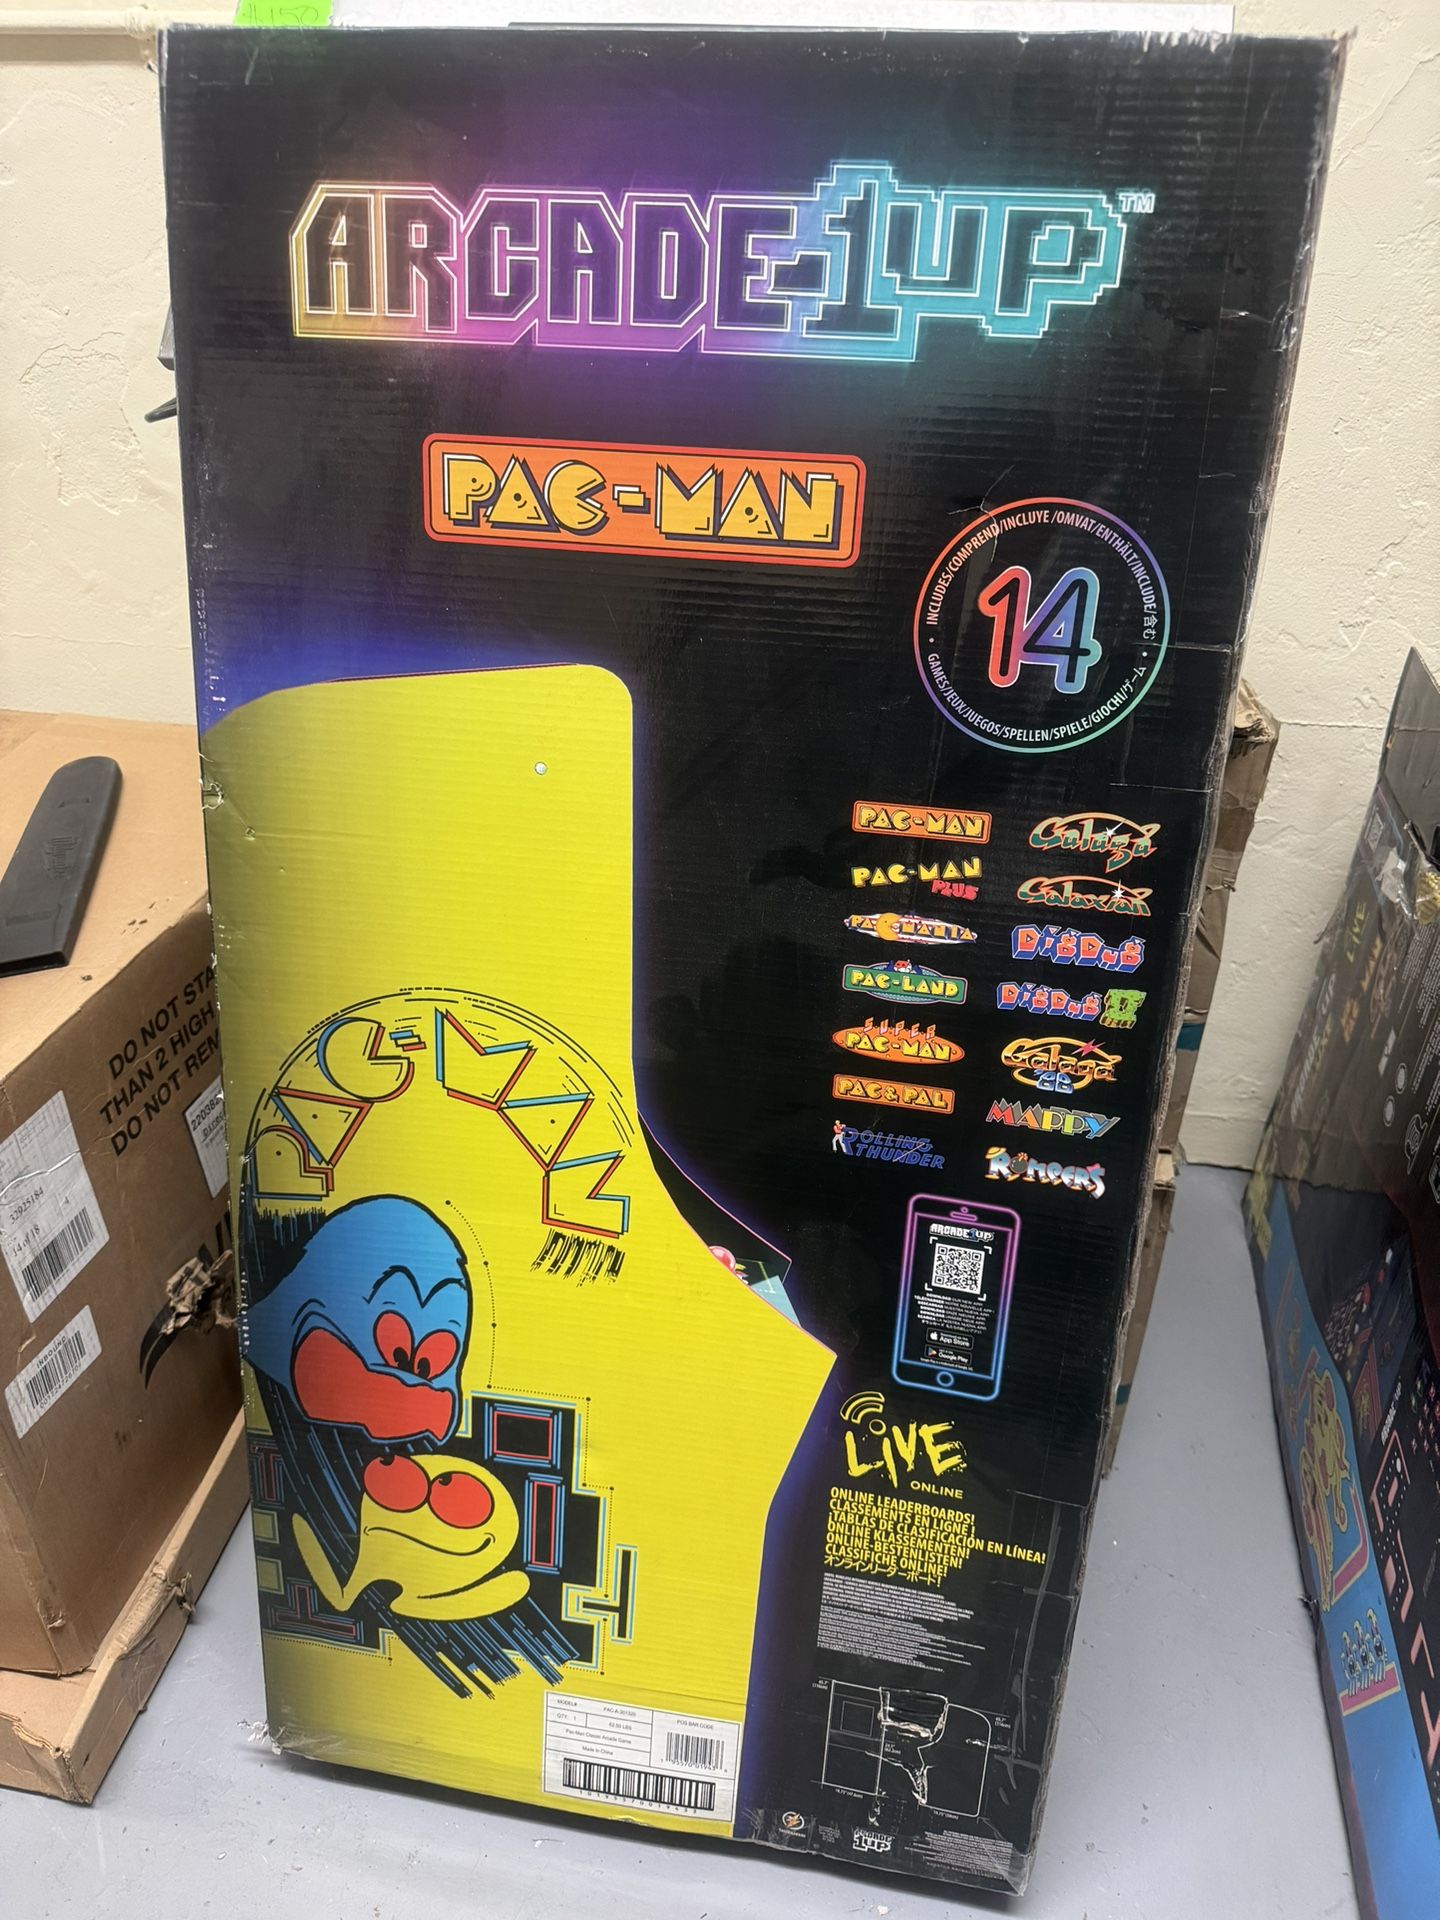 Arcade 1up Pac-man  Classic Game 17” Screen 4 Ft Tall 14 Games 